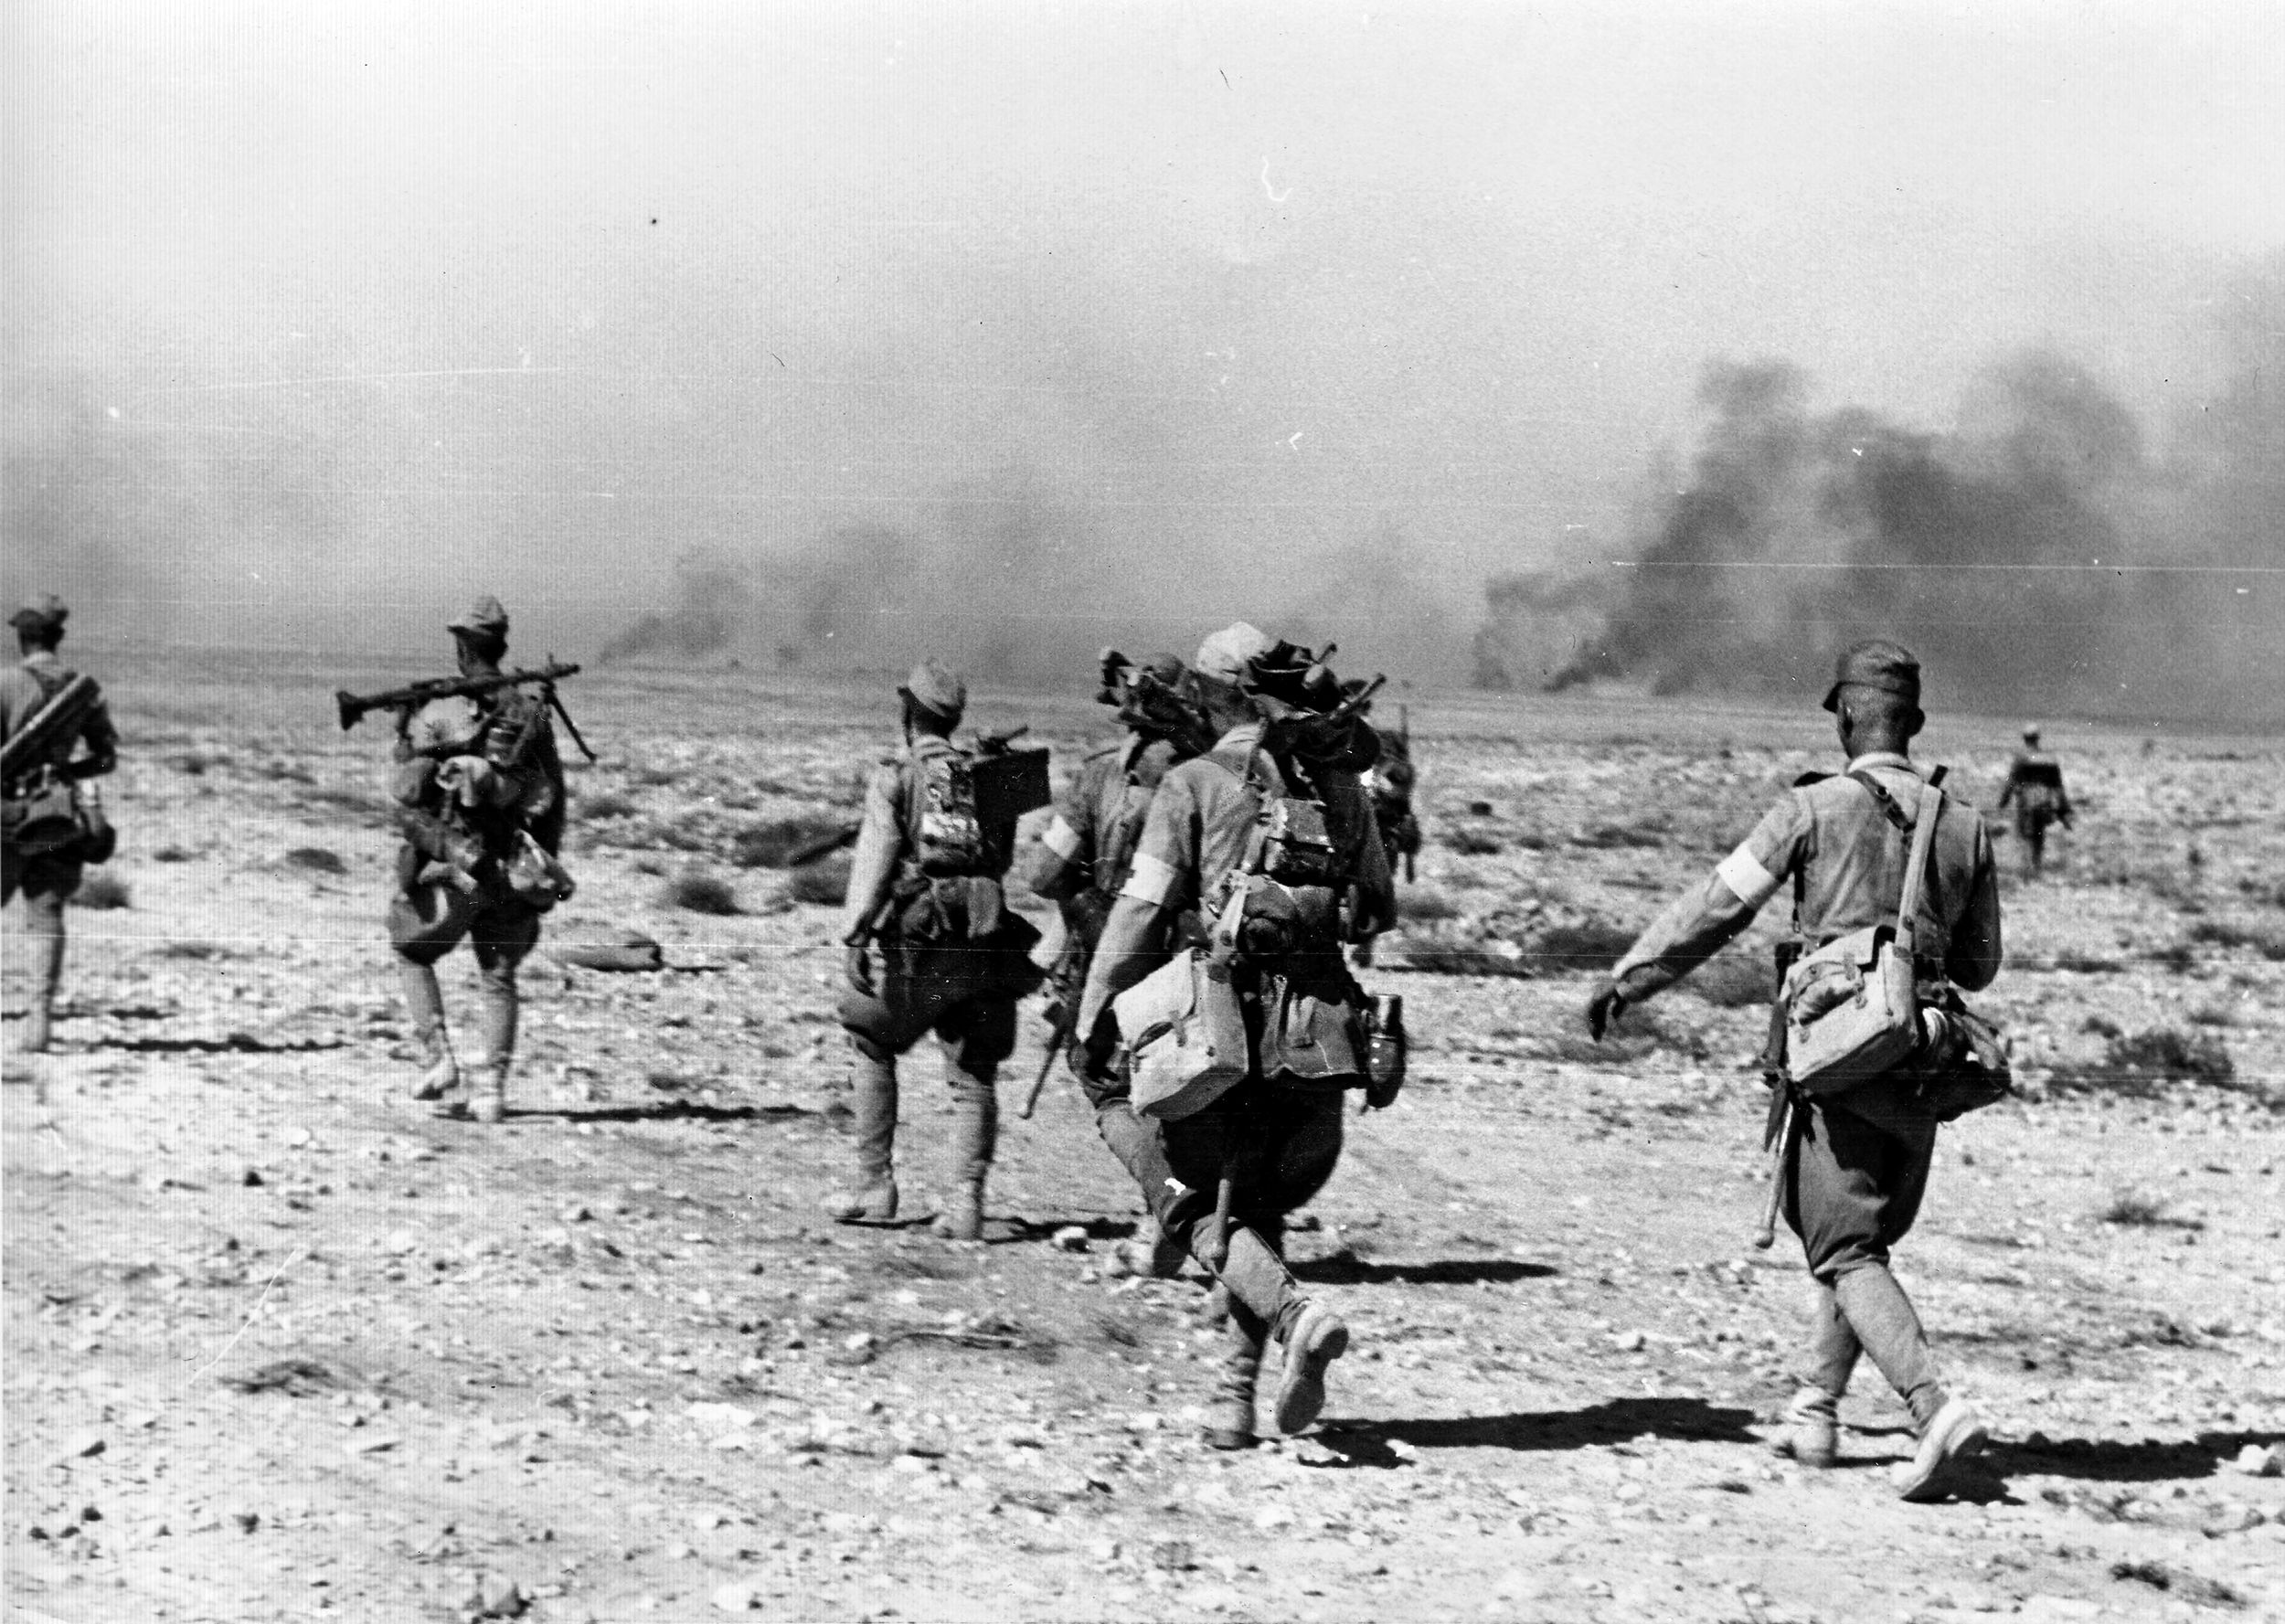 Afrika Korps infantry move across the desert, carrying an abundance of weapons and gear. Rommel’s demanding advance on the British caused frequent supply issues for his vehicles, as well as his soldiers.